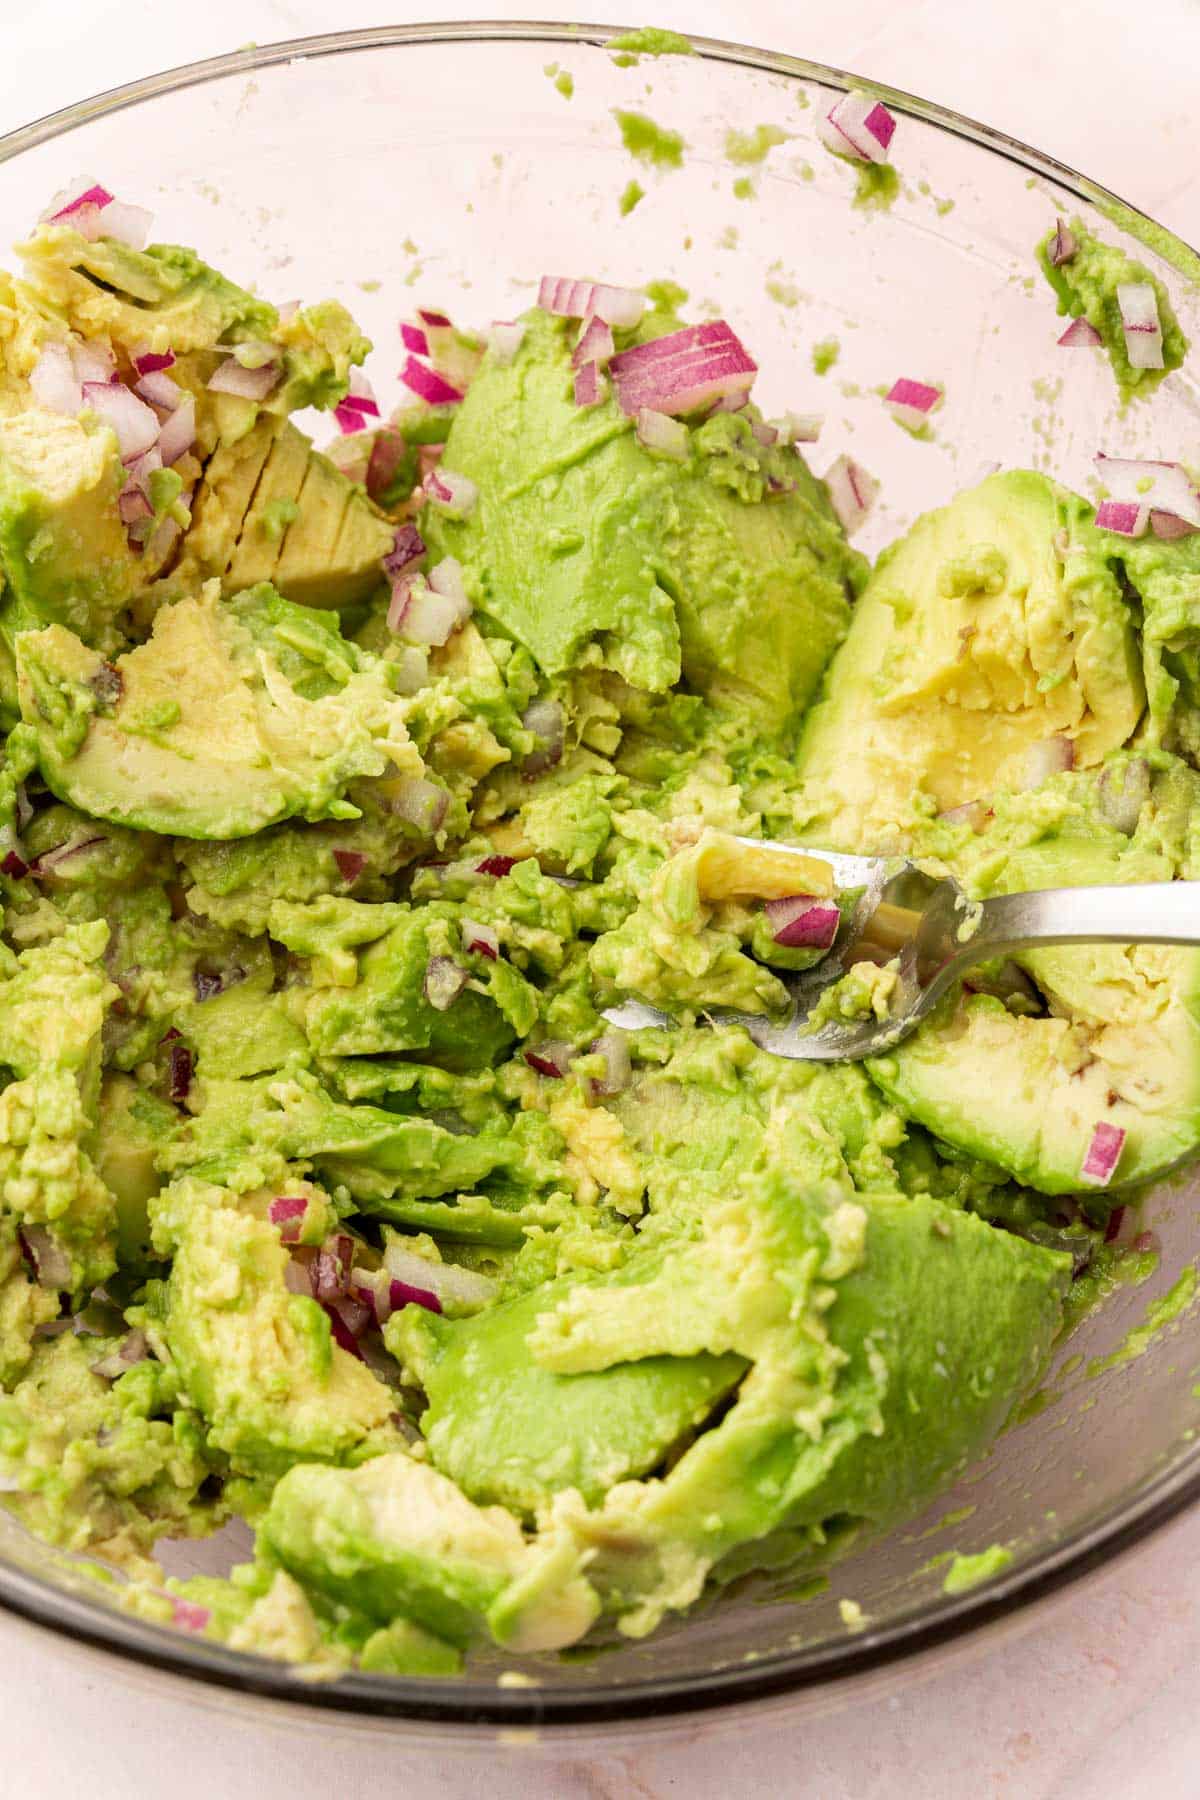 A closeup of avocados and red onion being mashed with a fork in a glass mixing bowl.